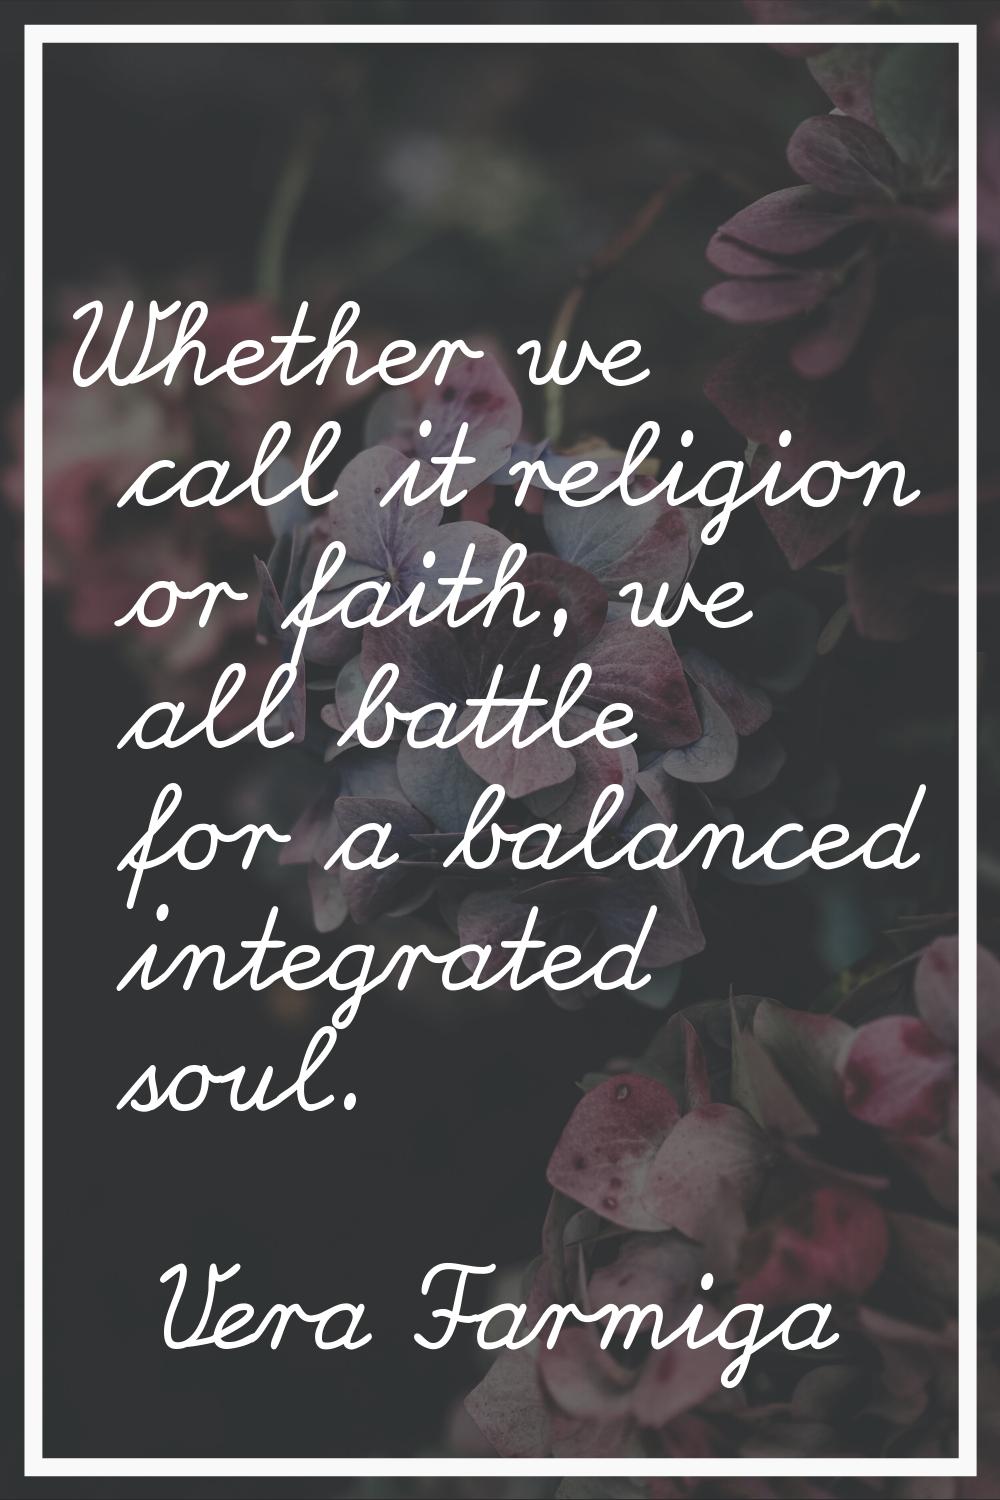 Whether we call it religion or faith, we all battle for a balanced integrated soul.